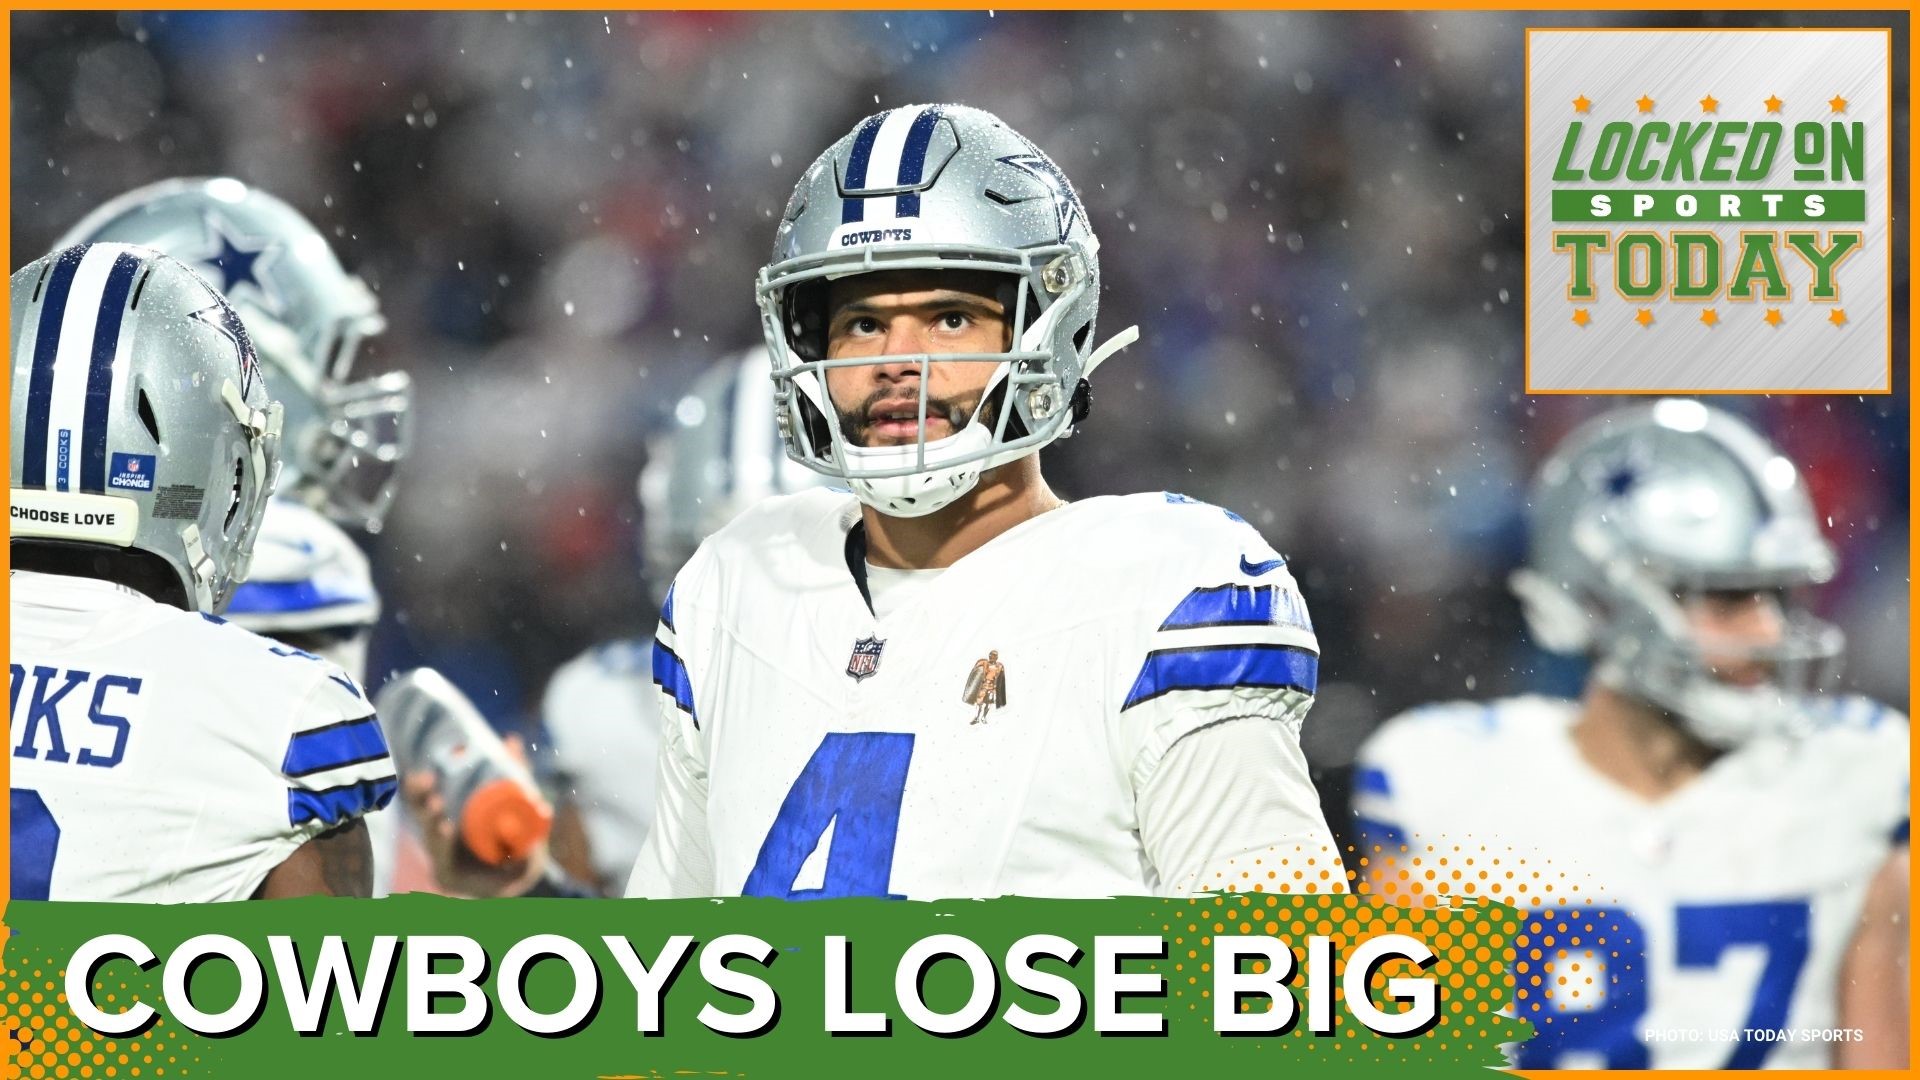 Discussing the day's top sports stories from the Dallas Cowboys get dominated to the Jaguars on a losing streak and a possible commissioner for college football.